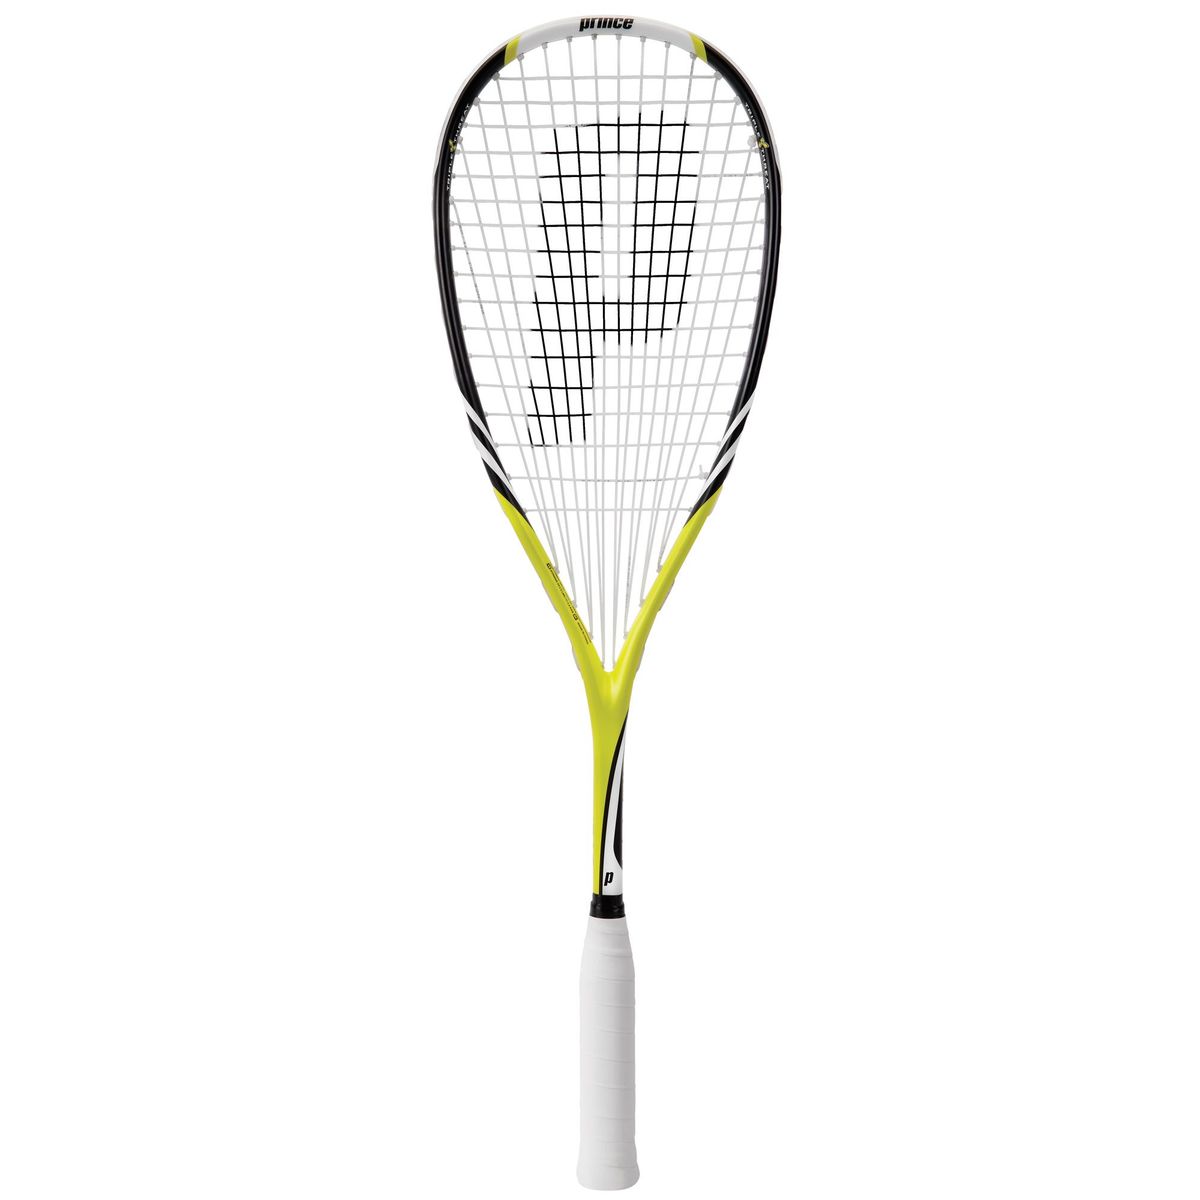 PRINCE TEAM COMBAT 300 SQUASH RACKET WITH CARRY BAG RRP £110 